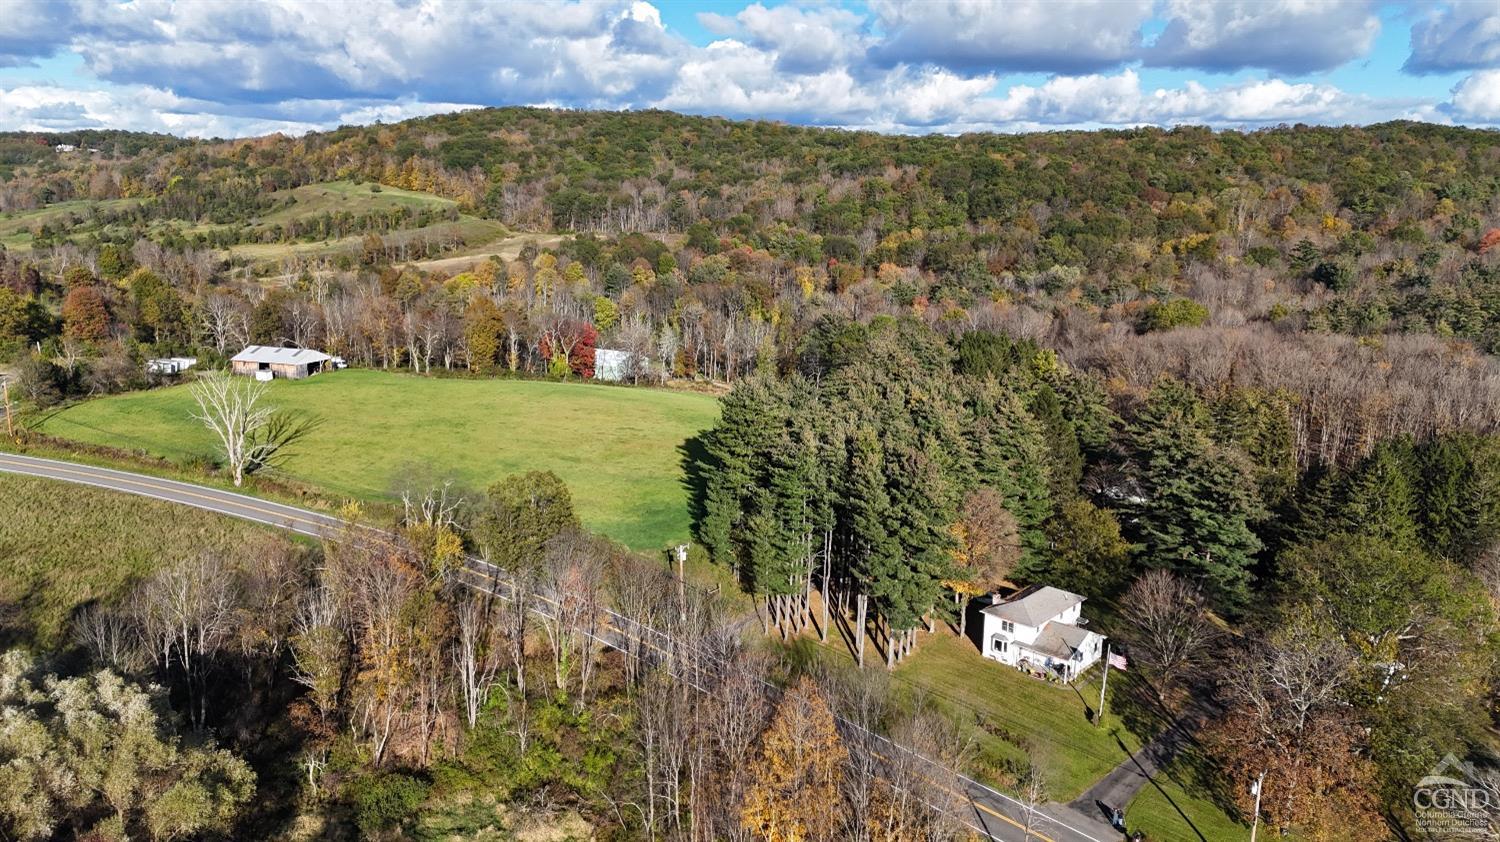 Property for Sale at 174 County Route 11, Gallatin, New York - Bedrooms: 9 
Bathrooms: 5  - $1,450,000